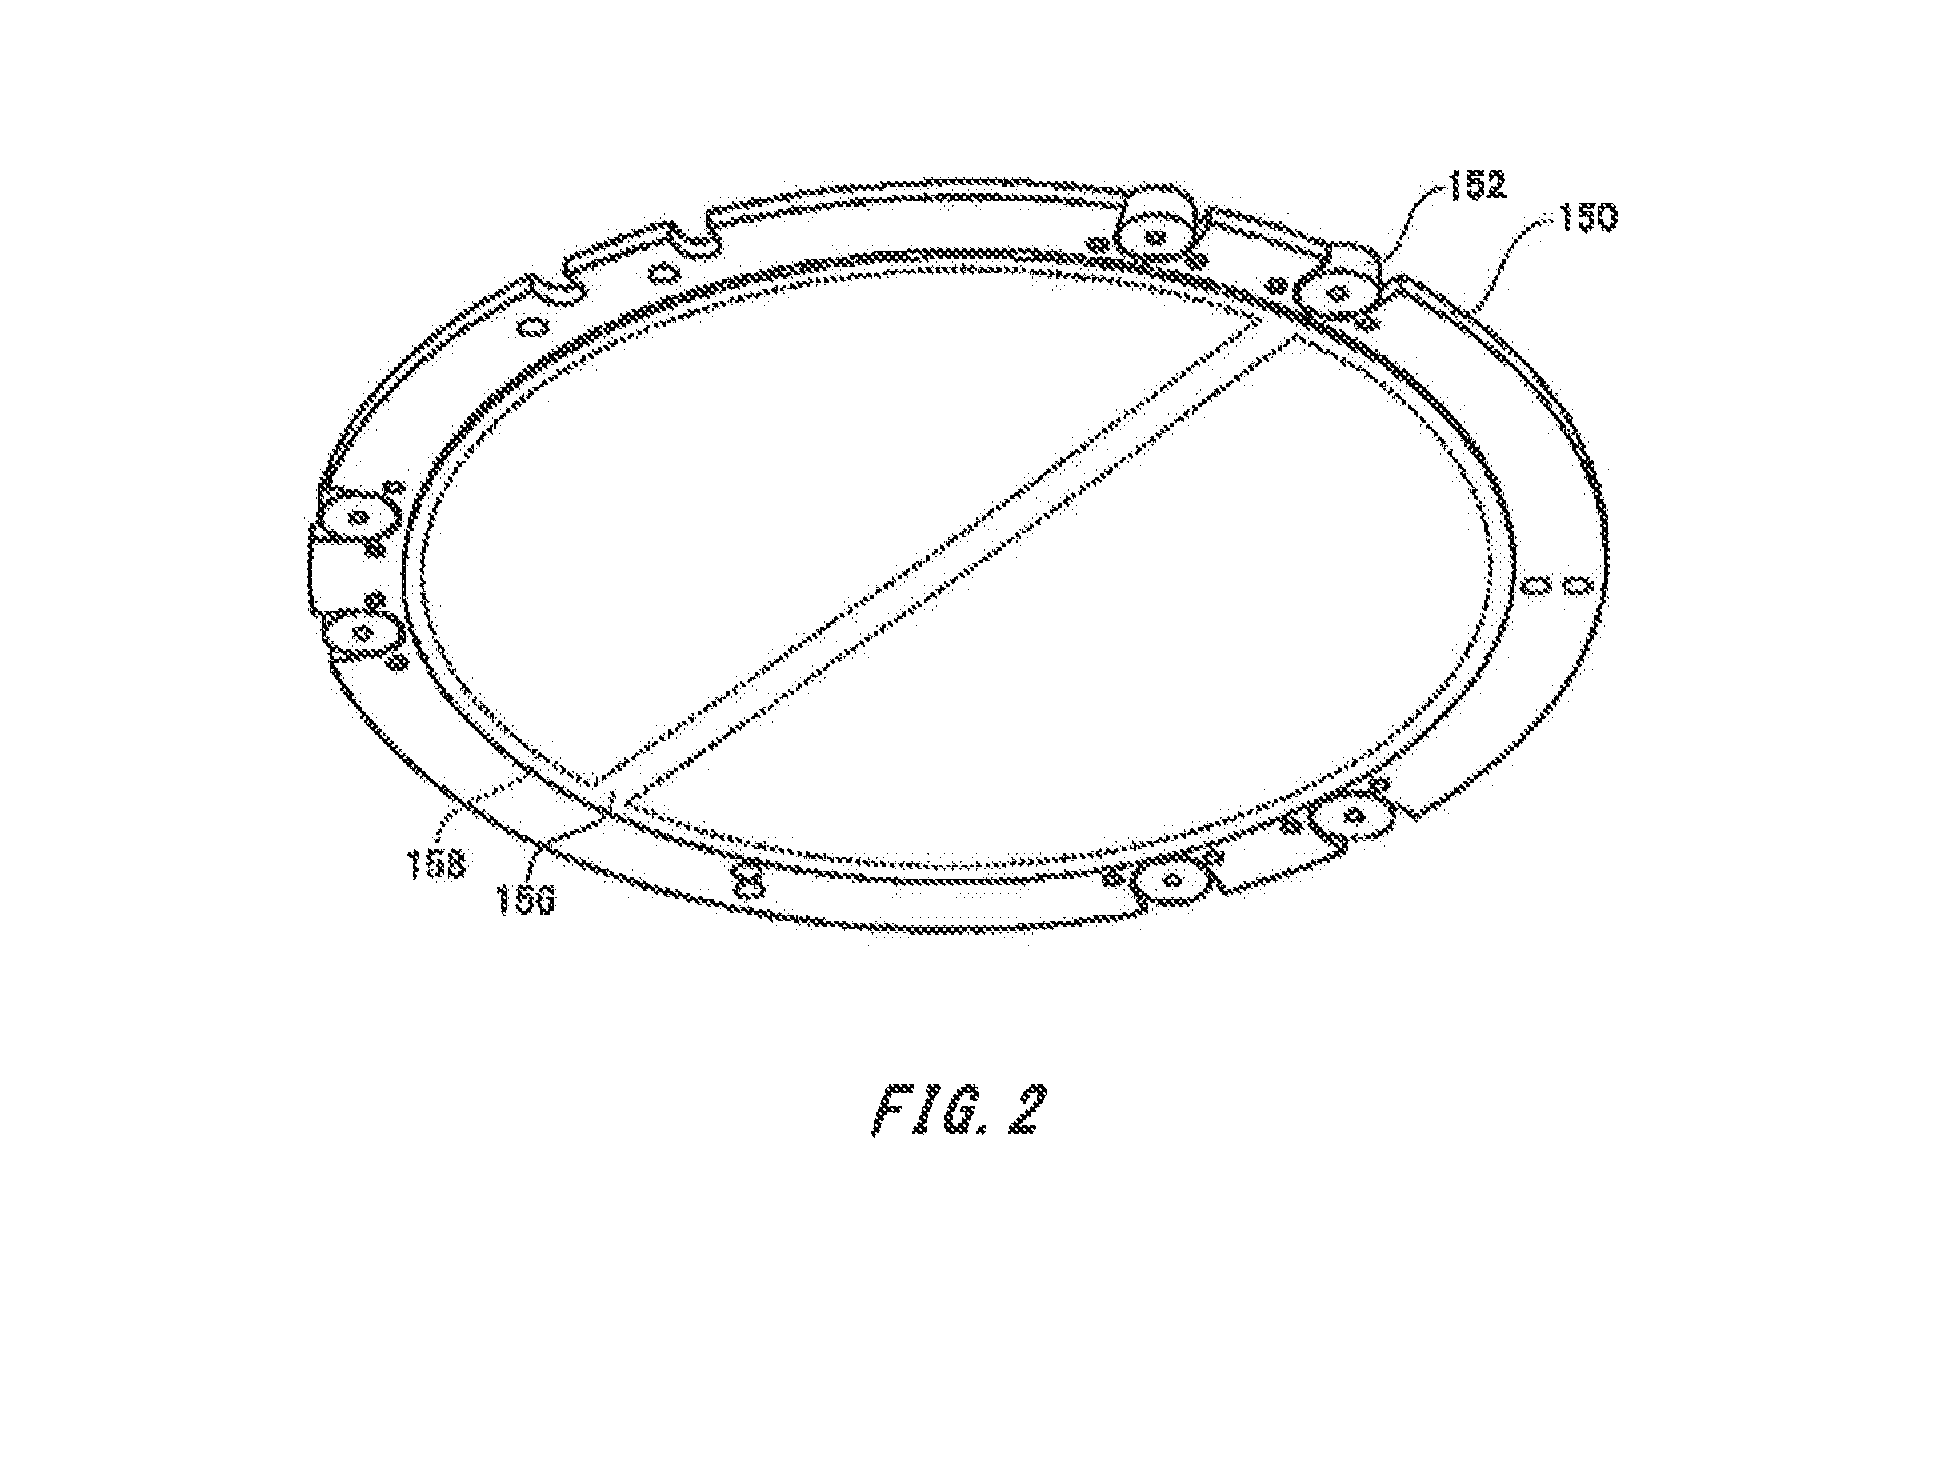 Substrate bonding apparatus, substrate holding apparatus, substrate bonding method, substrate holding method, multilayered semiconductor device, and multilayered substrate